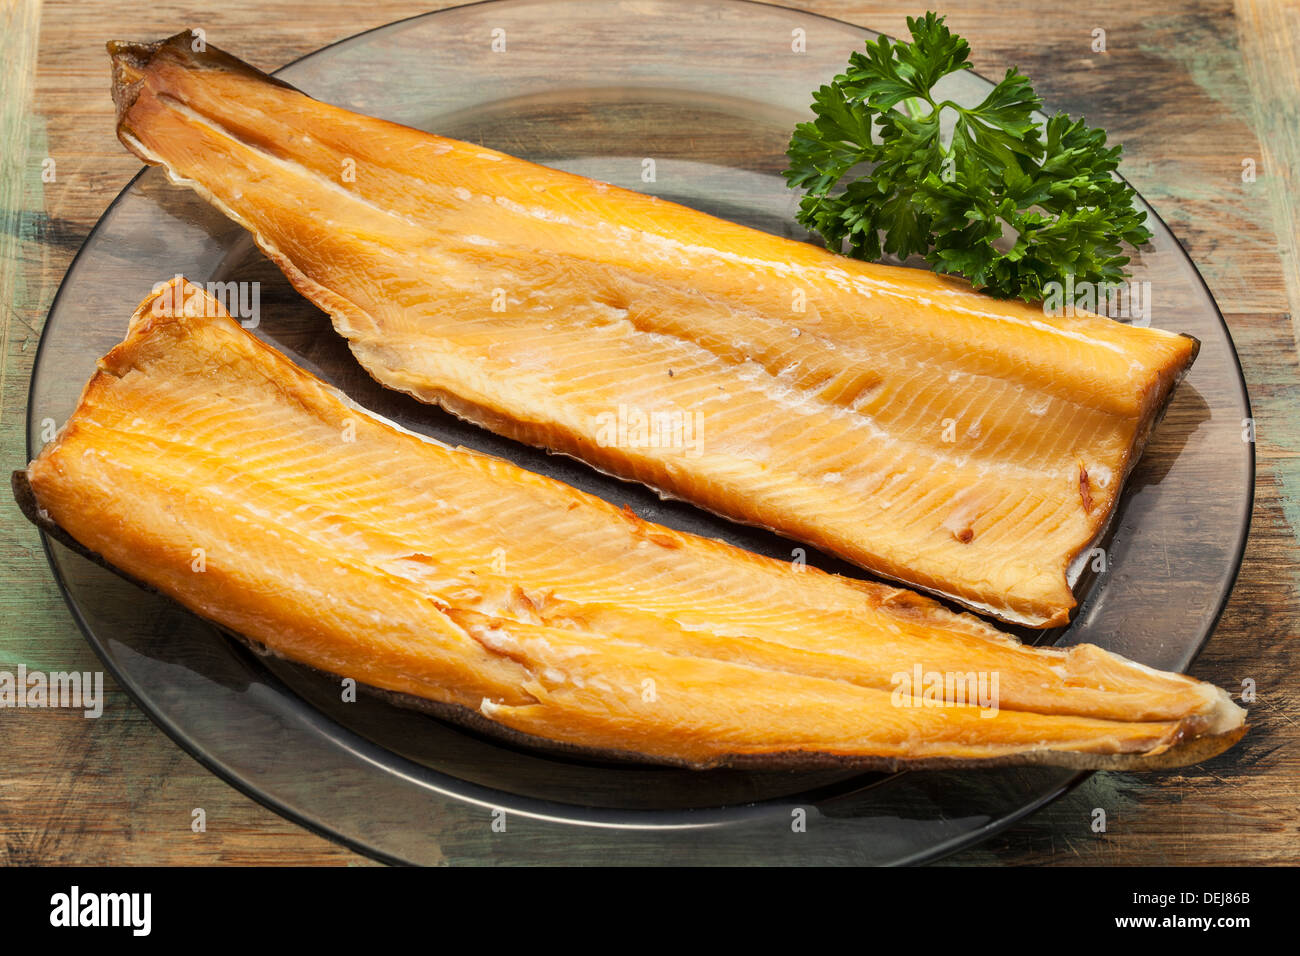 smoked trout fillet on a glass plate with parsley leaf Stock Photo